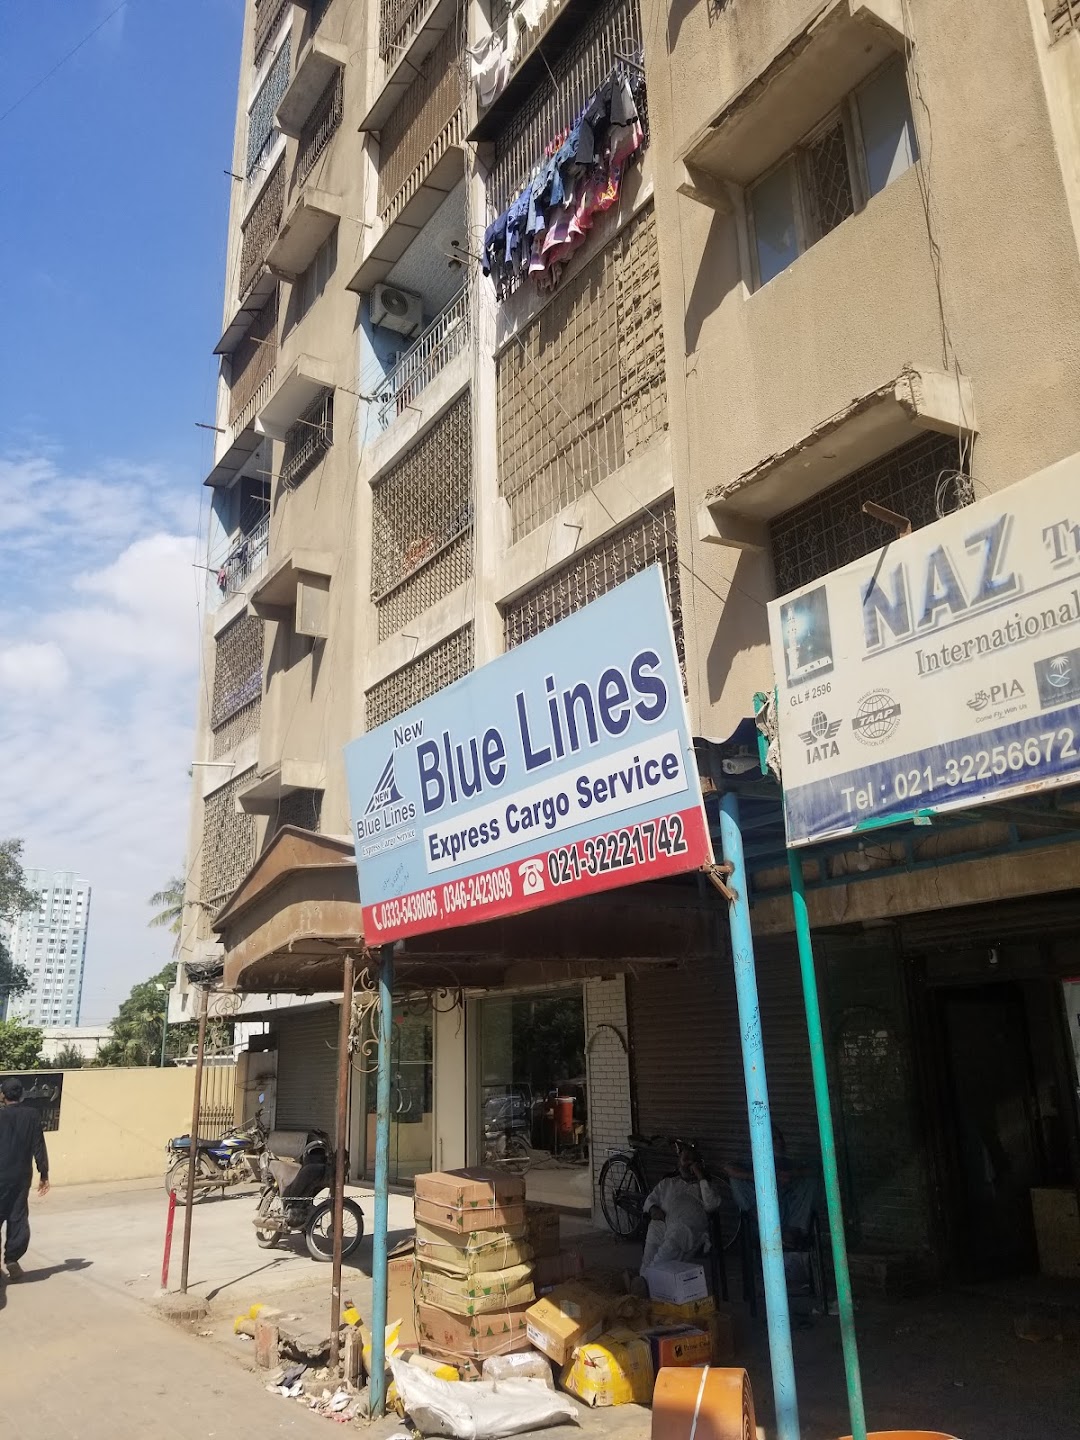 Blue lineS Express cargo services